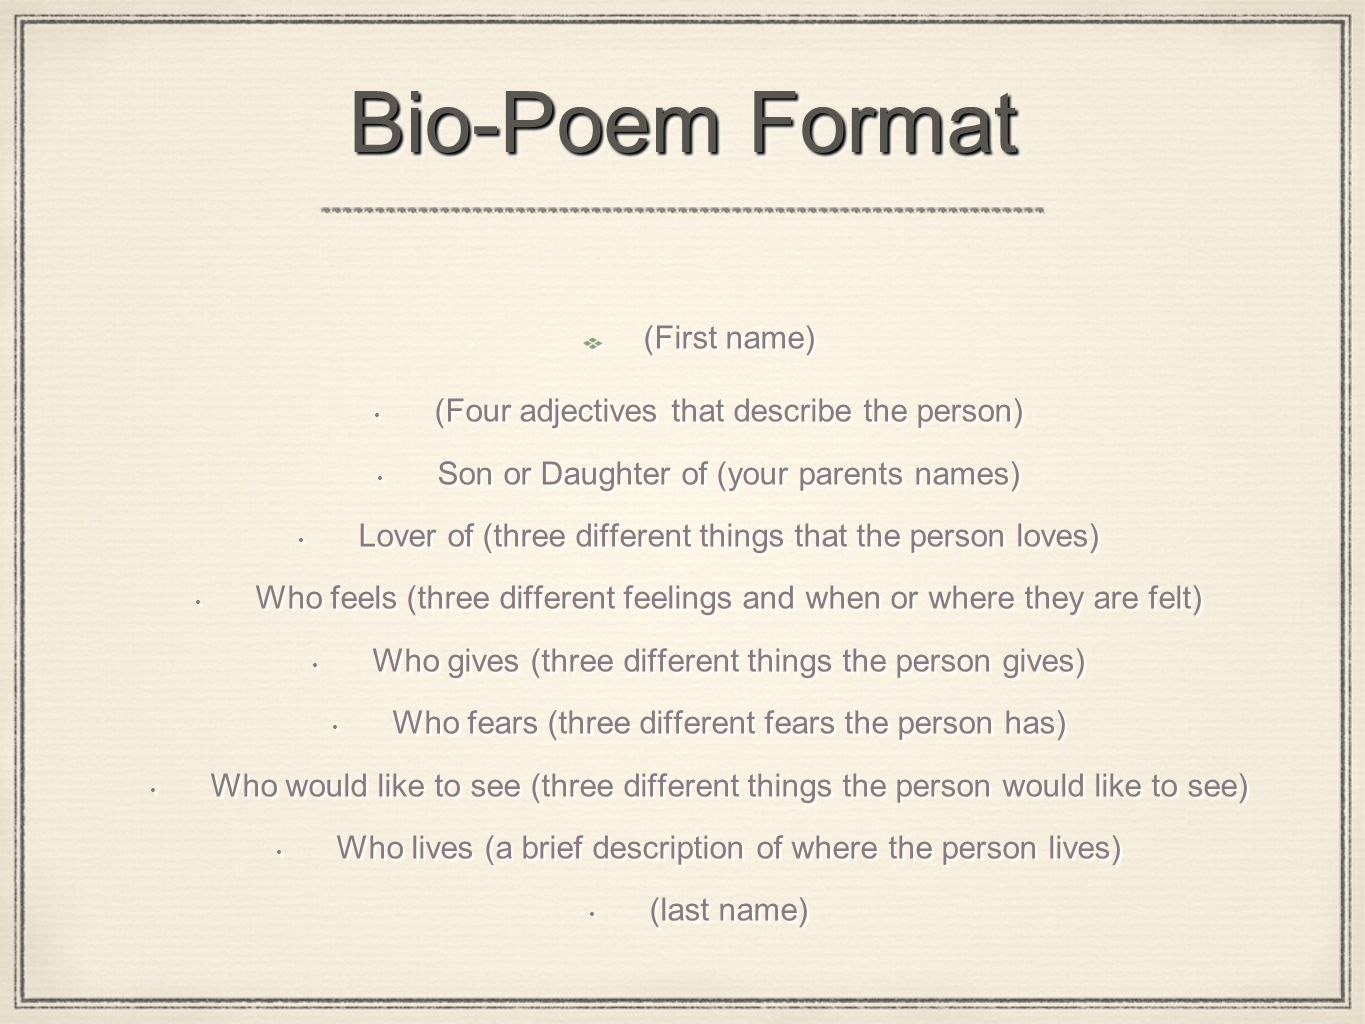 Bio Poem Miguel A. Arce Ramos English 23th. - ppt video online download